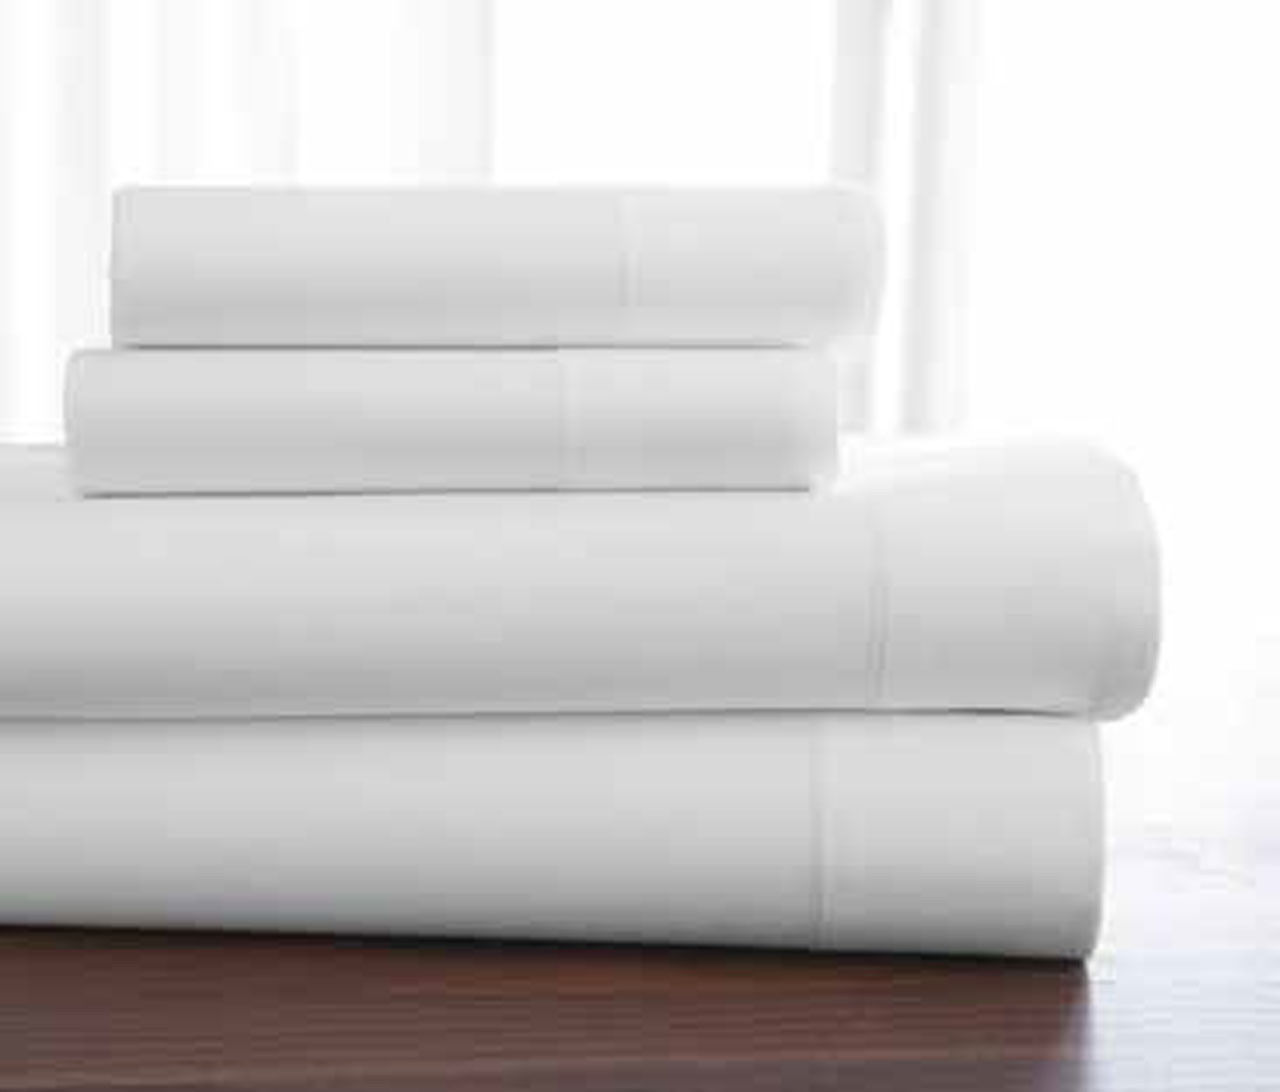 How does Welspun T-400 Premium Hygrocotton Sheets simplify size identification?